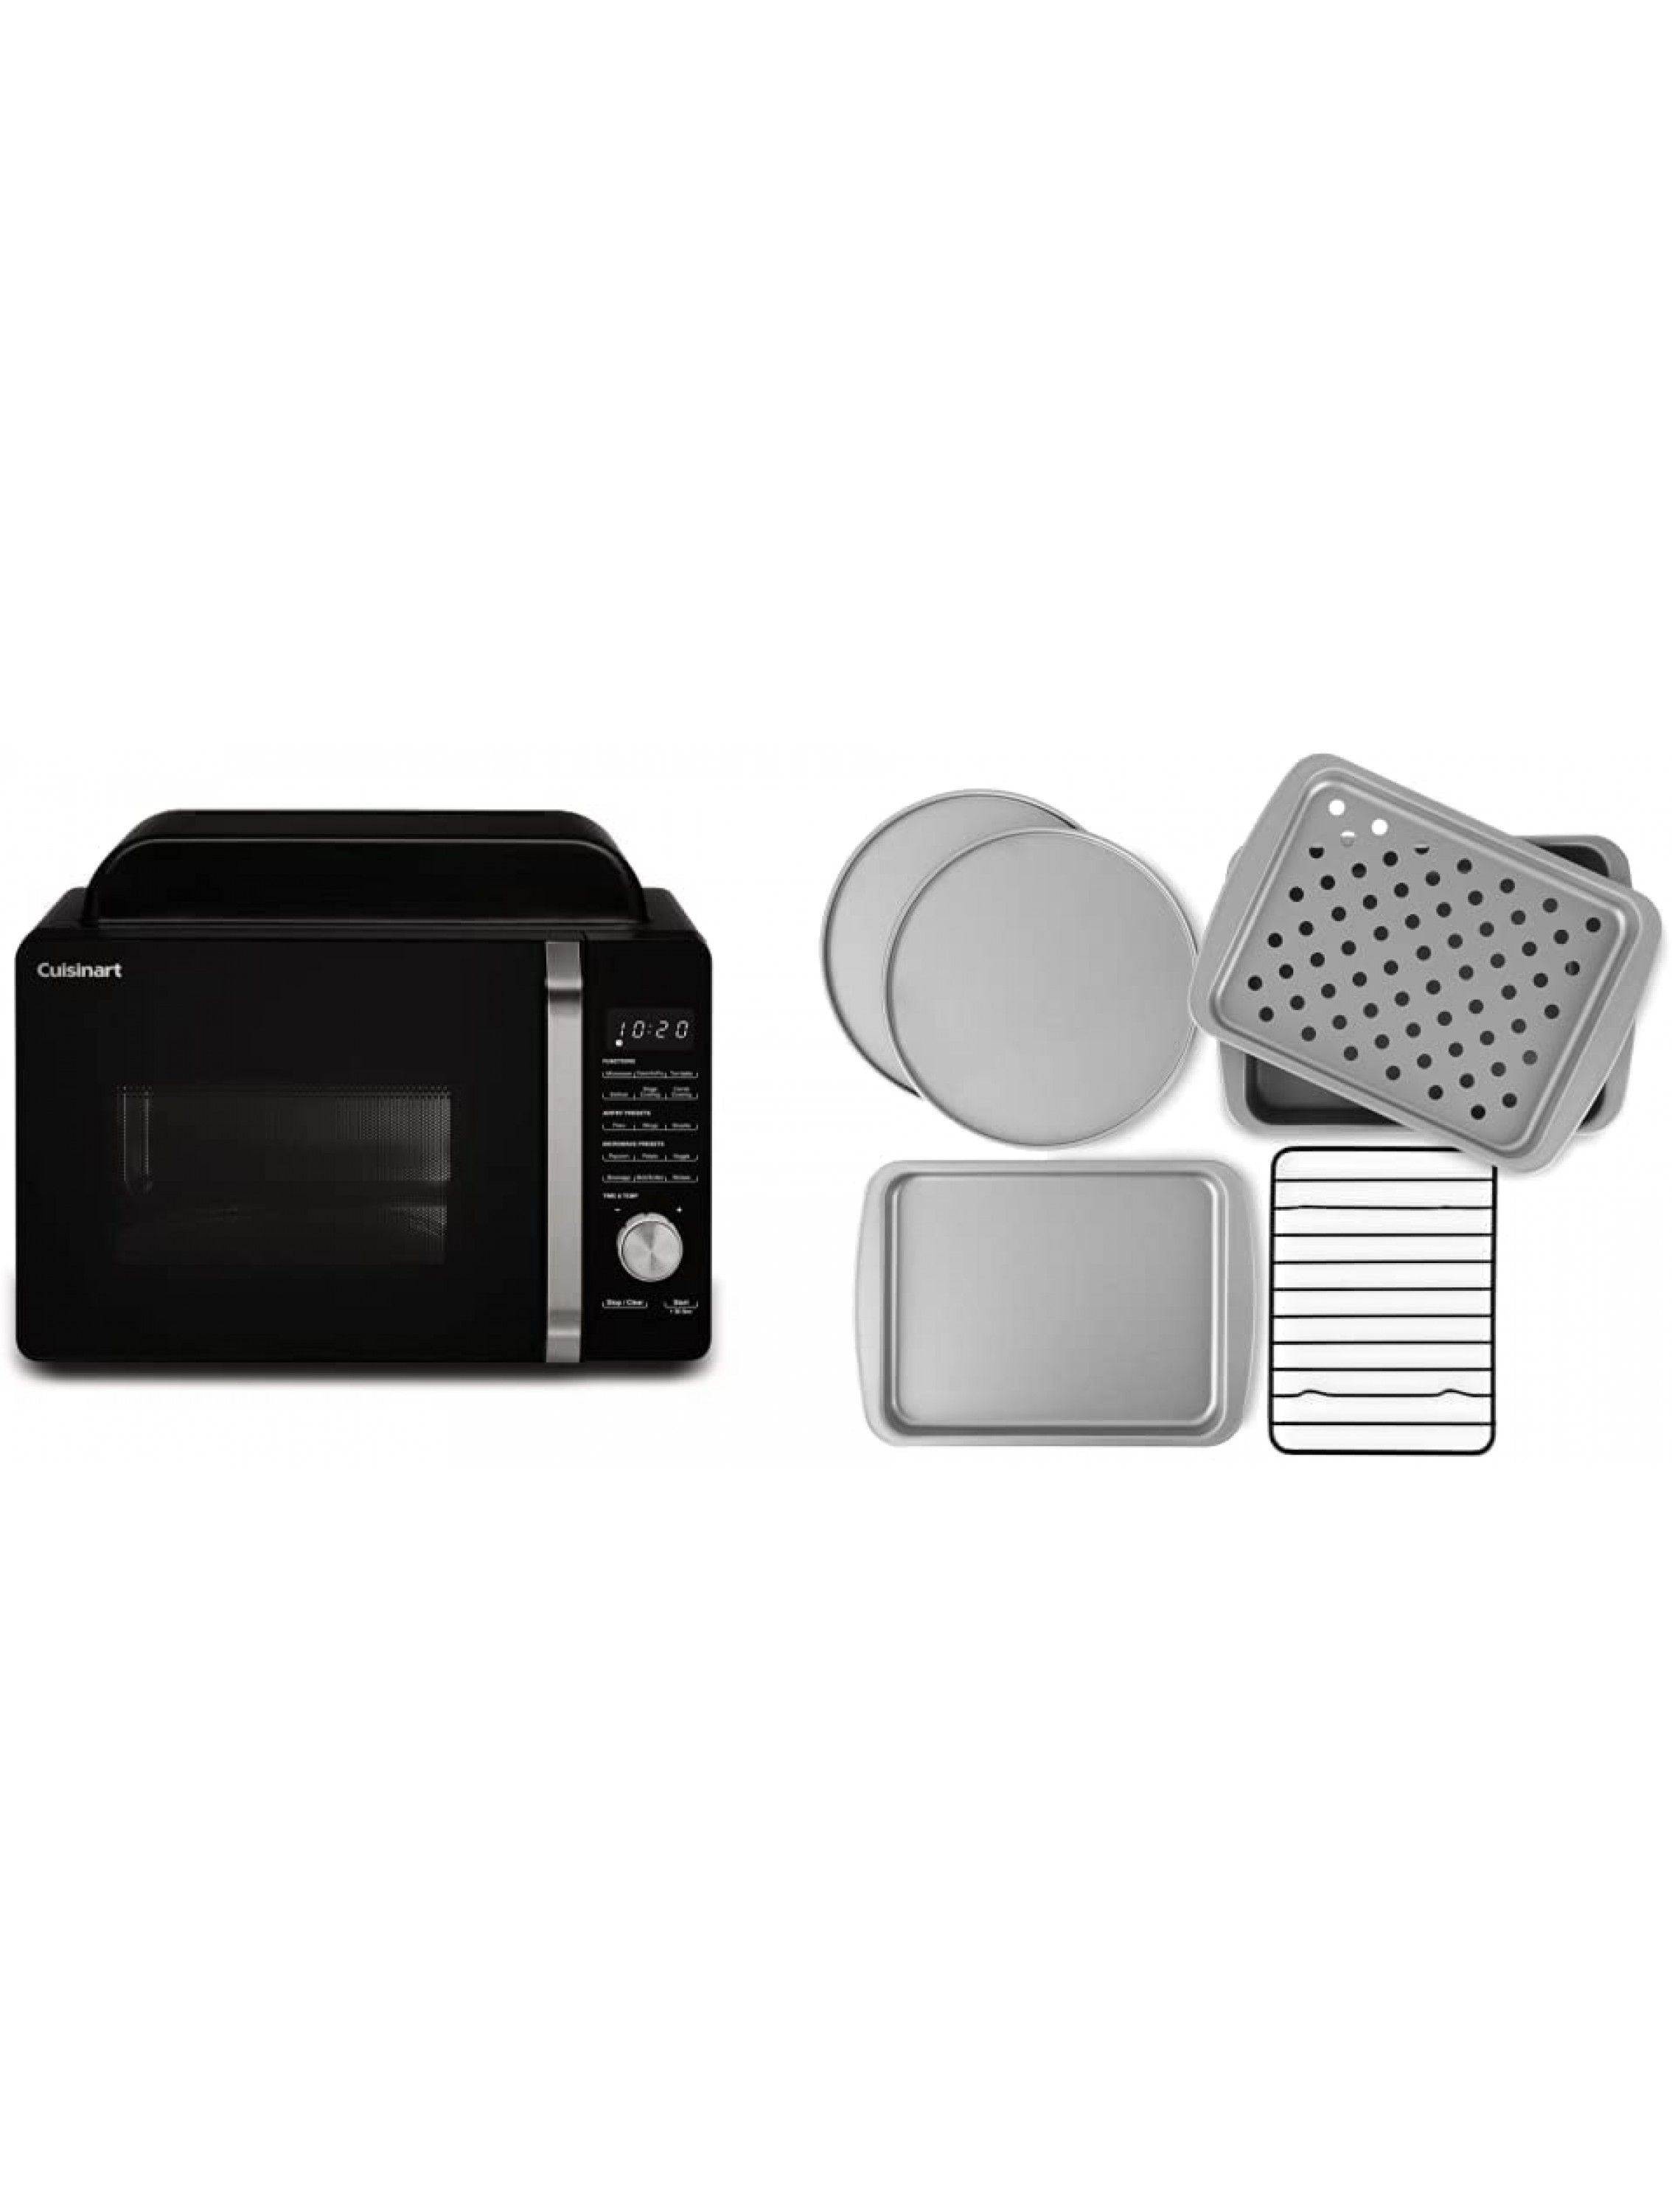 Cuisinart Black AMW-60 3-in-1 Microwave AirFryer Oven & G & S Metal Products Company OvenStuff Personal Size 6-Piece Toaster Oven Set-Non-Stick Baking Pans Silver - B53TSITC3